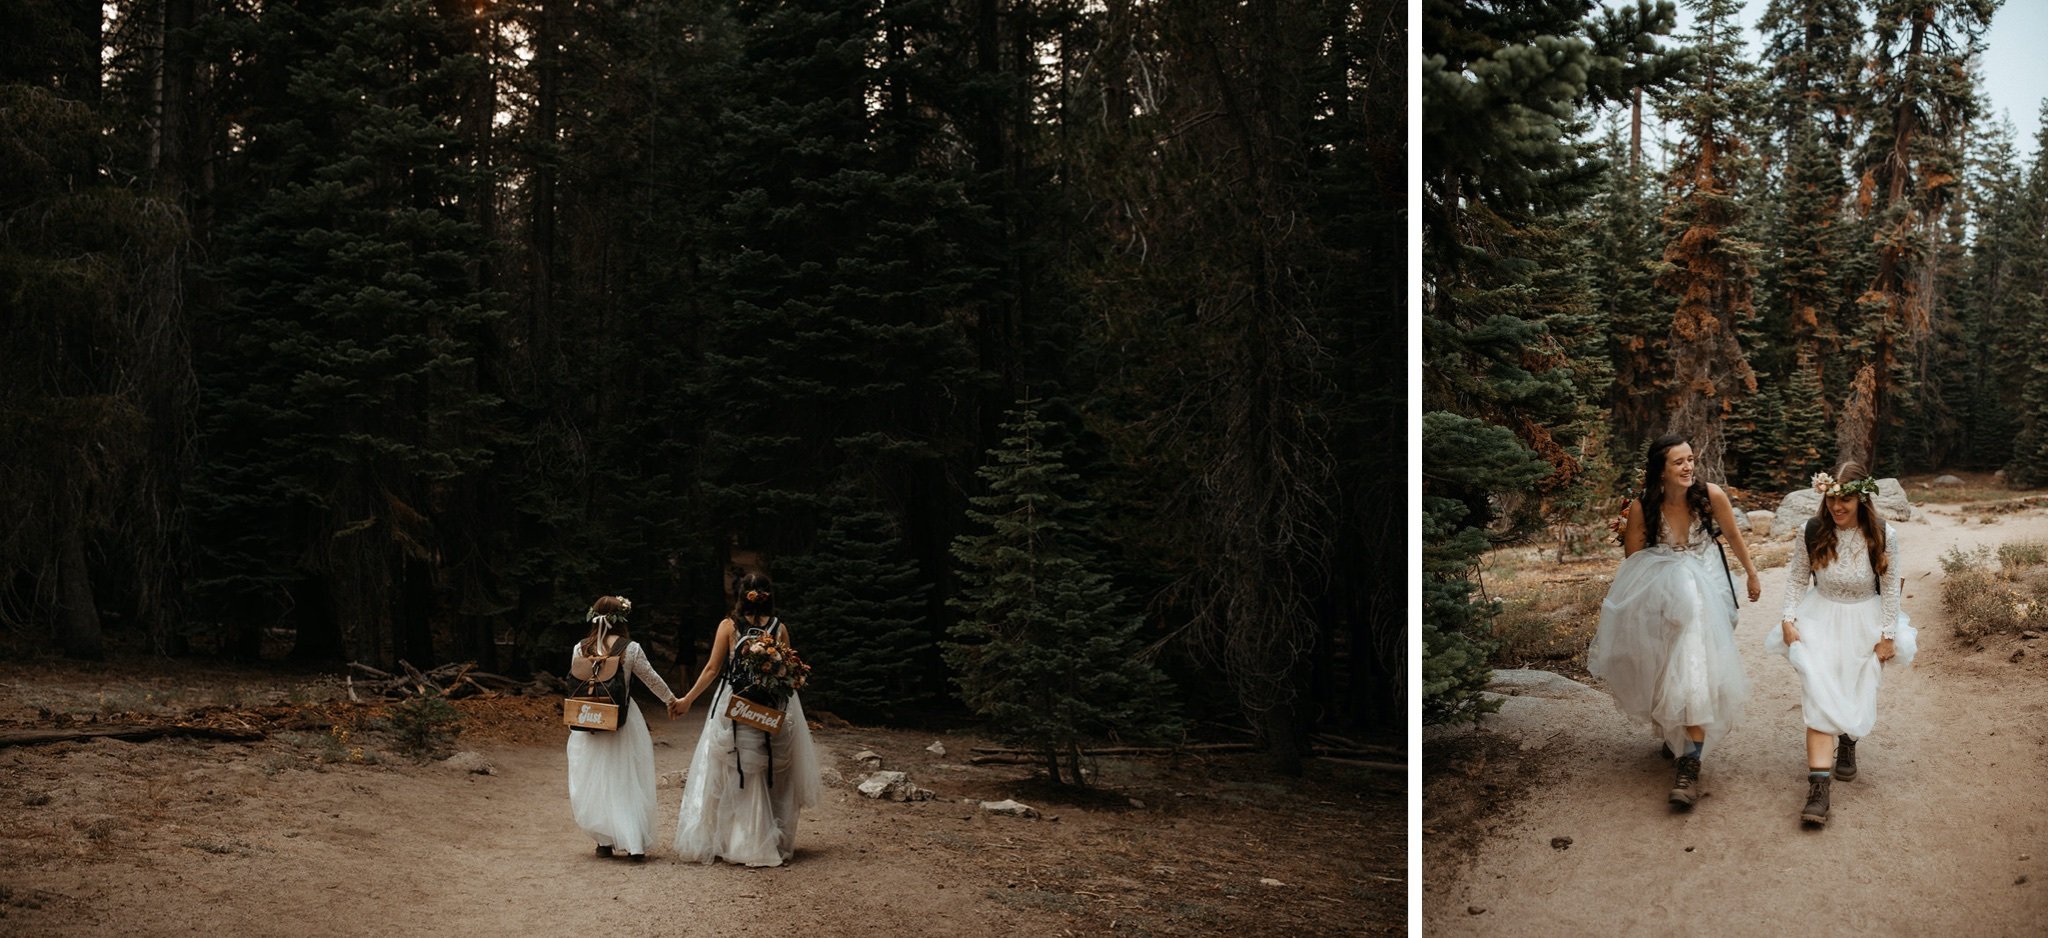 Yosemite National Park Elopement with Two Brides-Will Khoury29.jpg